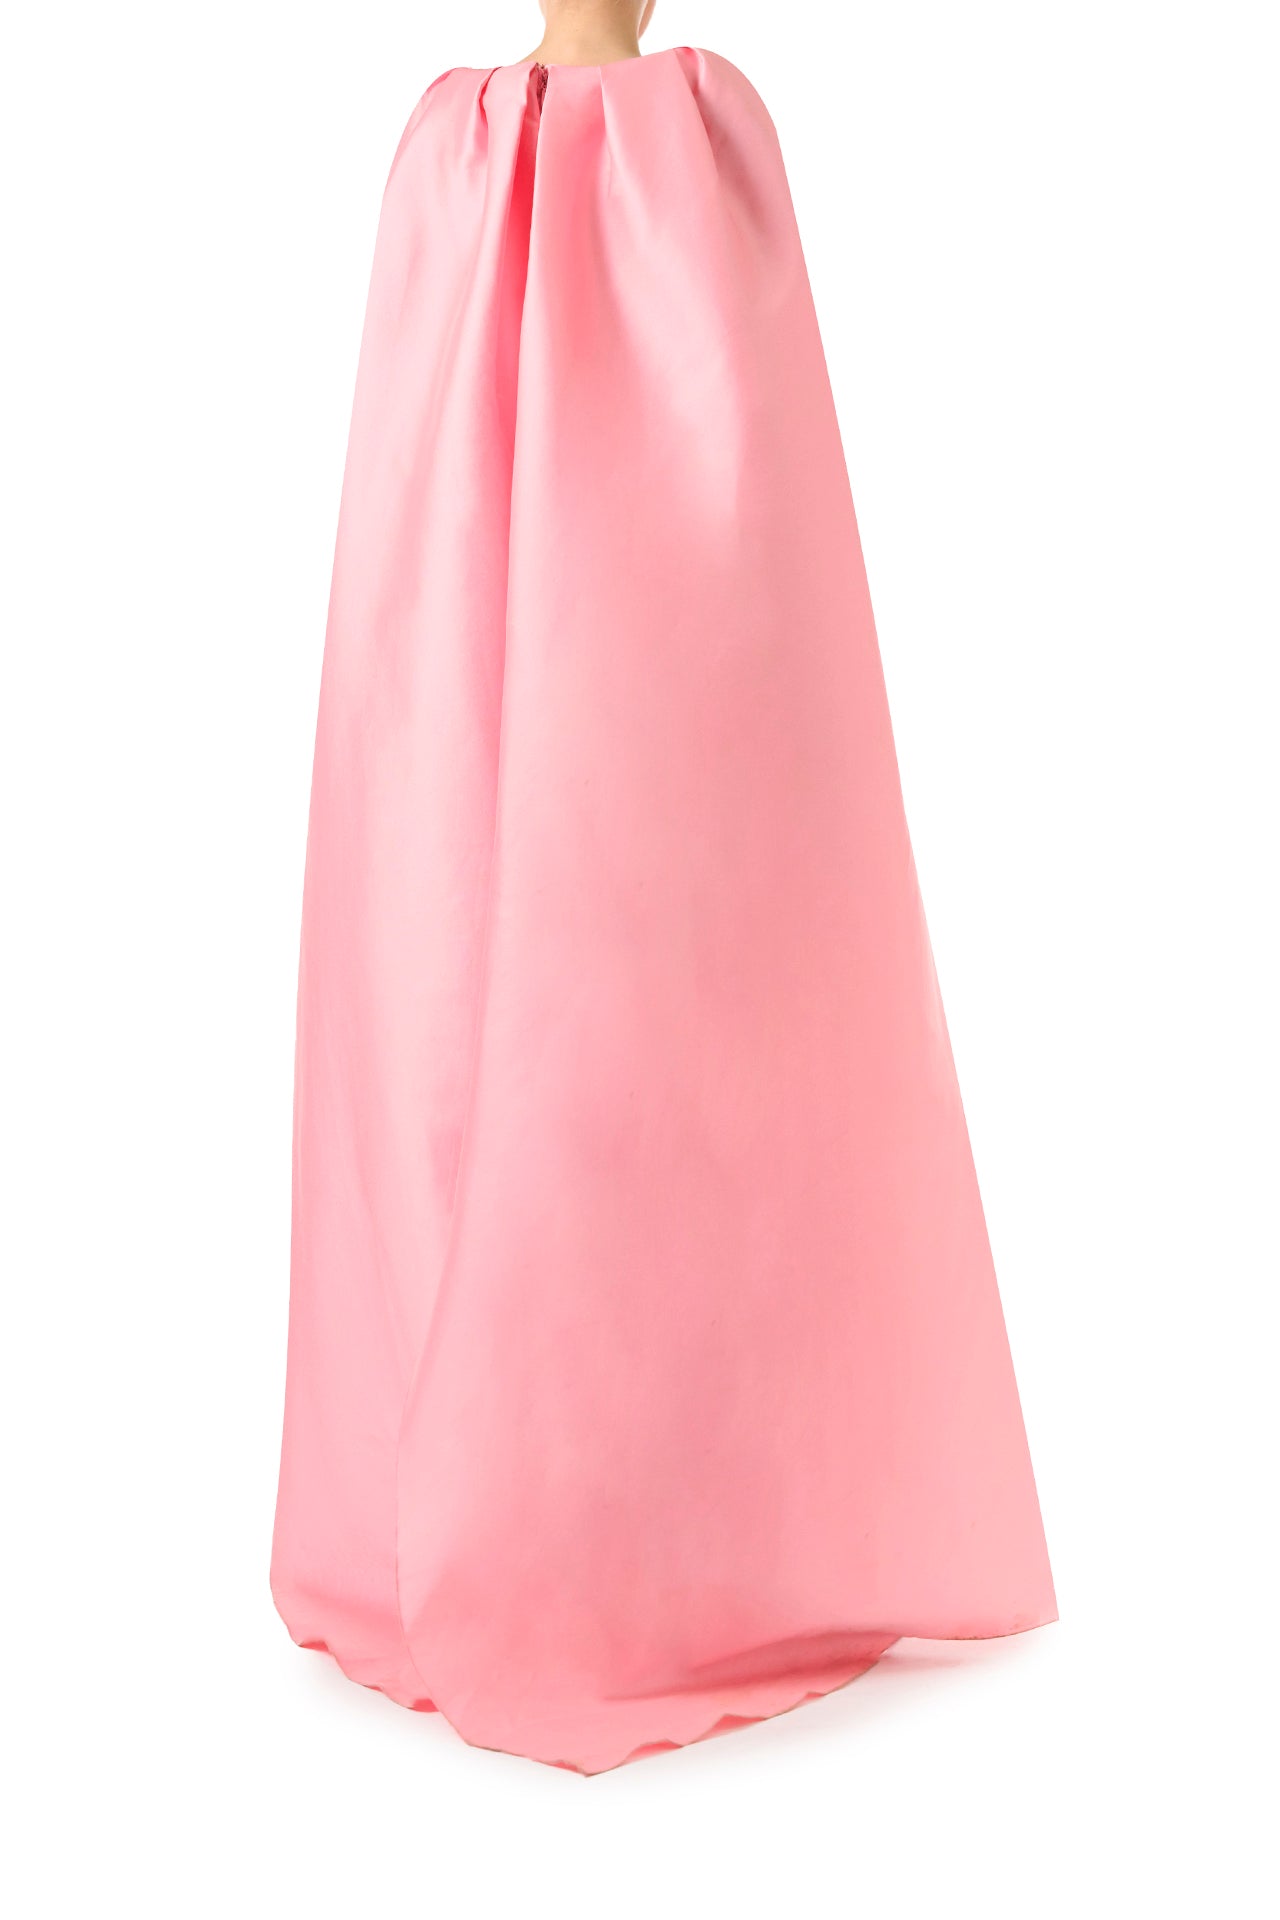 Monique Lhuillier Fall 2024 Dahlia pink mikado, sleeveless column gown with scoop neckline and attached cape - back.